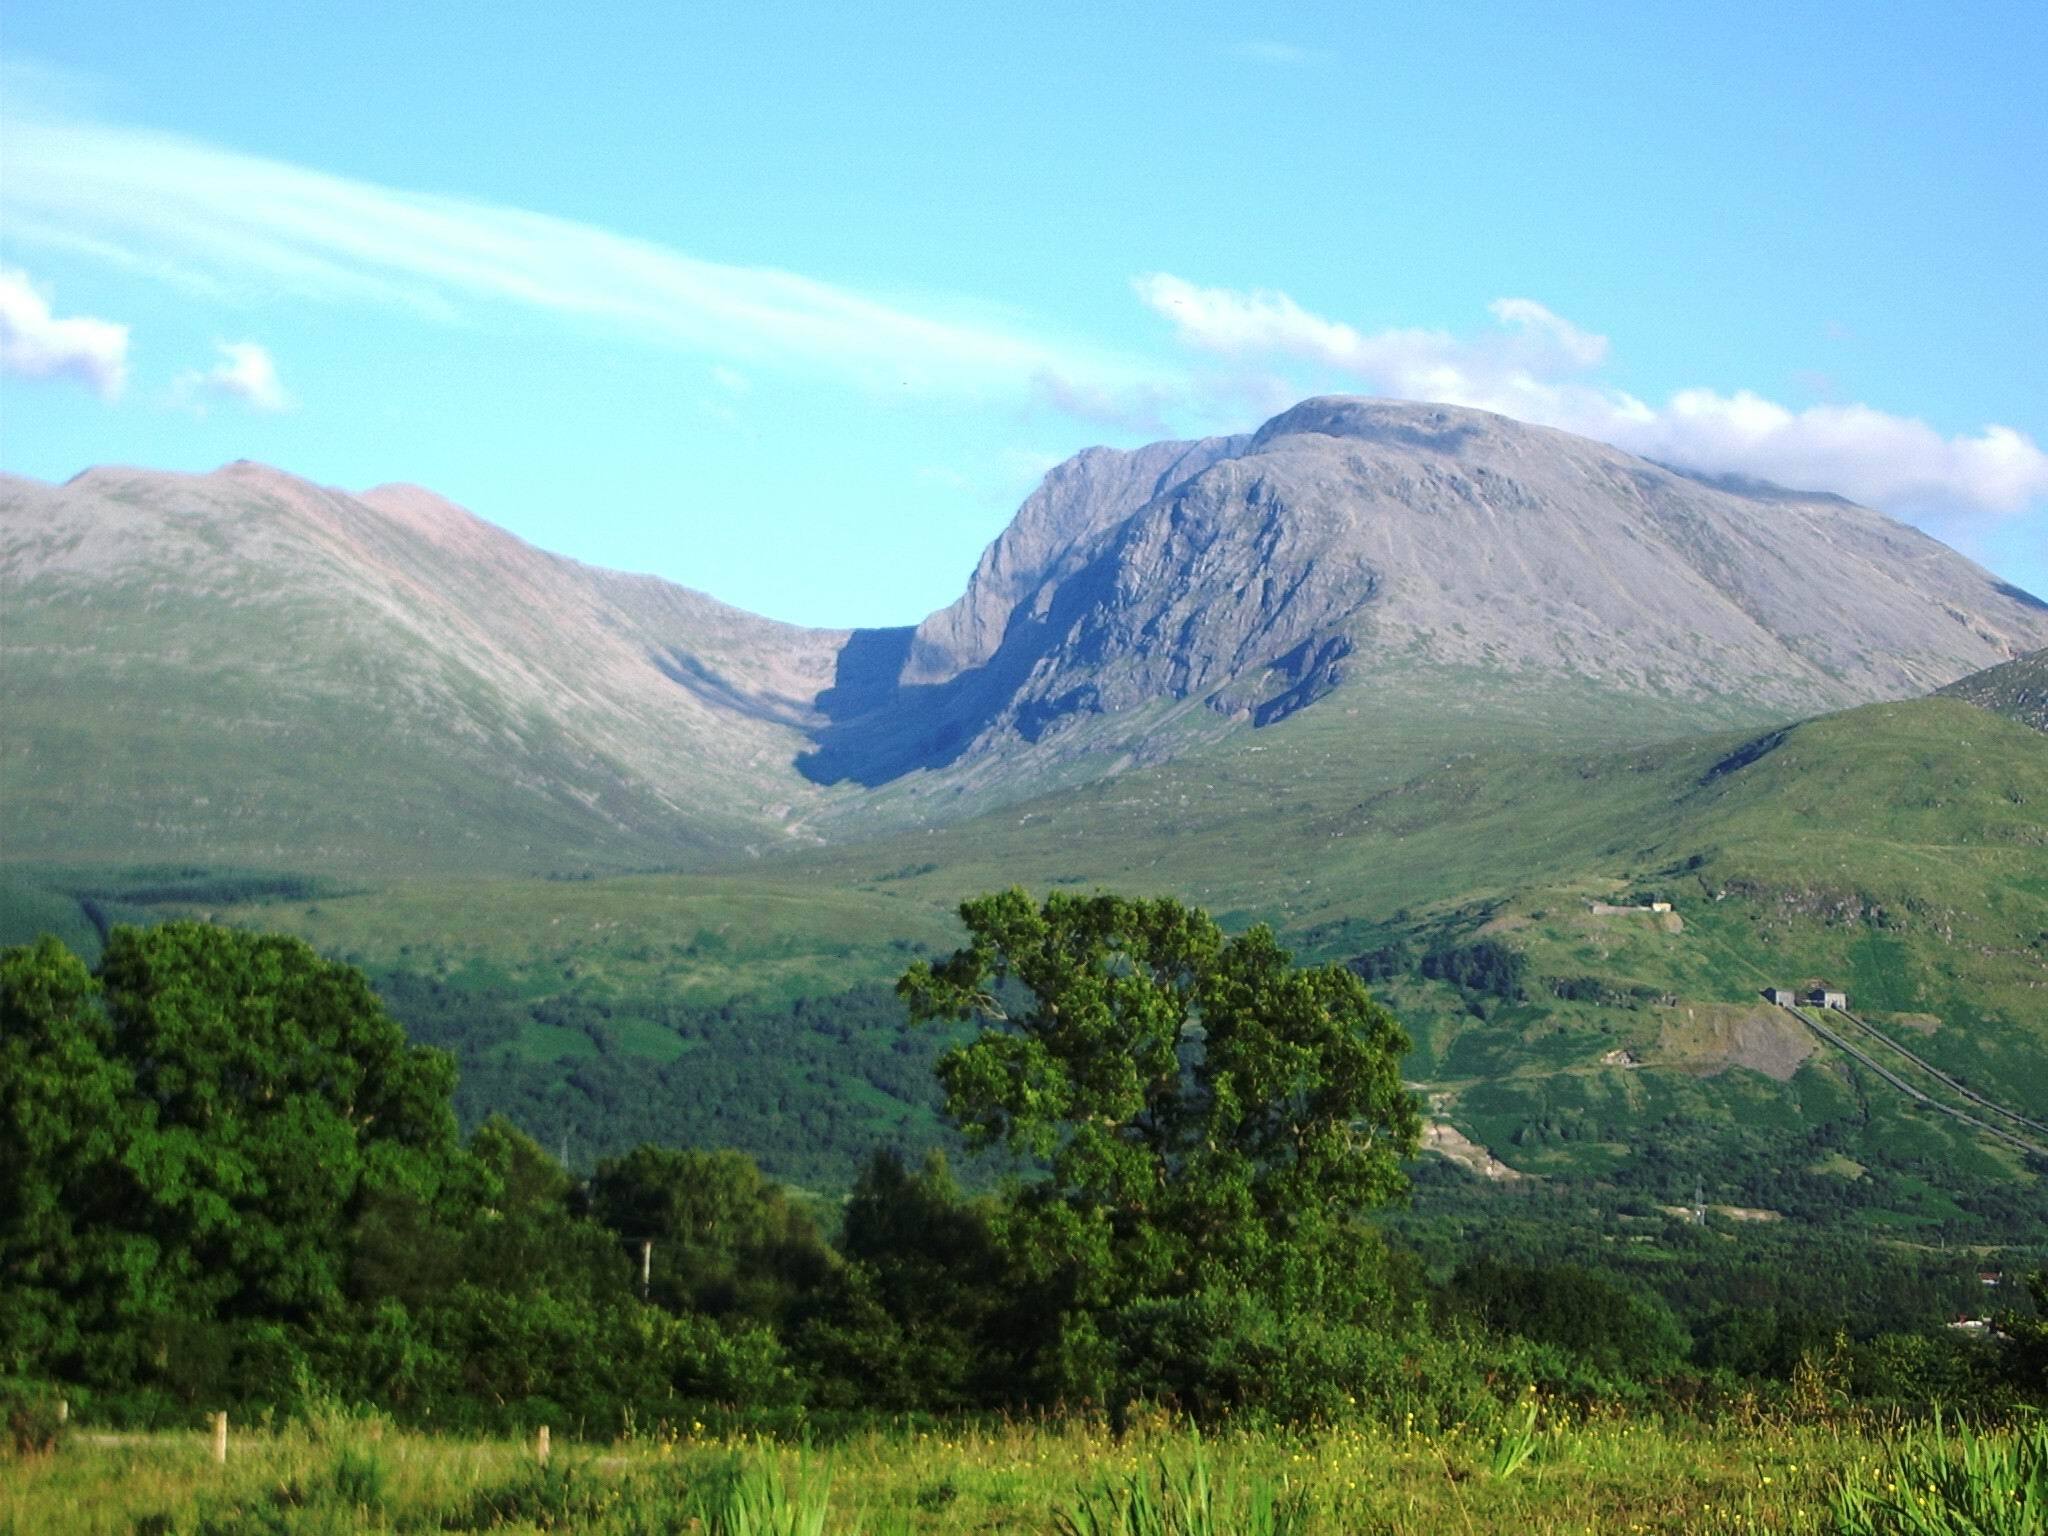 At just over 1,300 meters, Ben Nevis is the United Kingdom's tallest peak. 